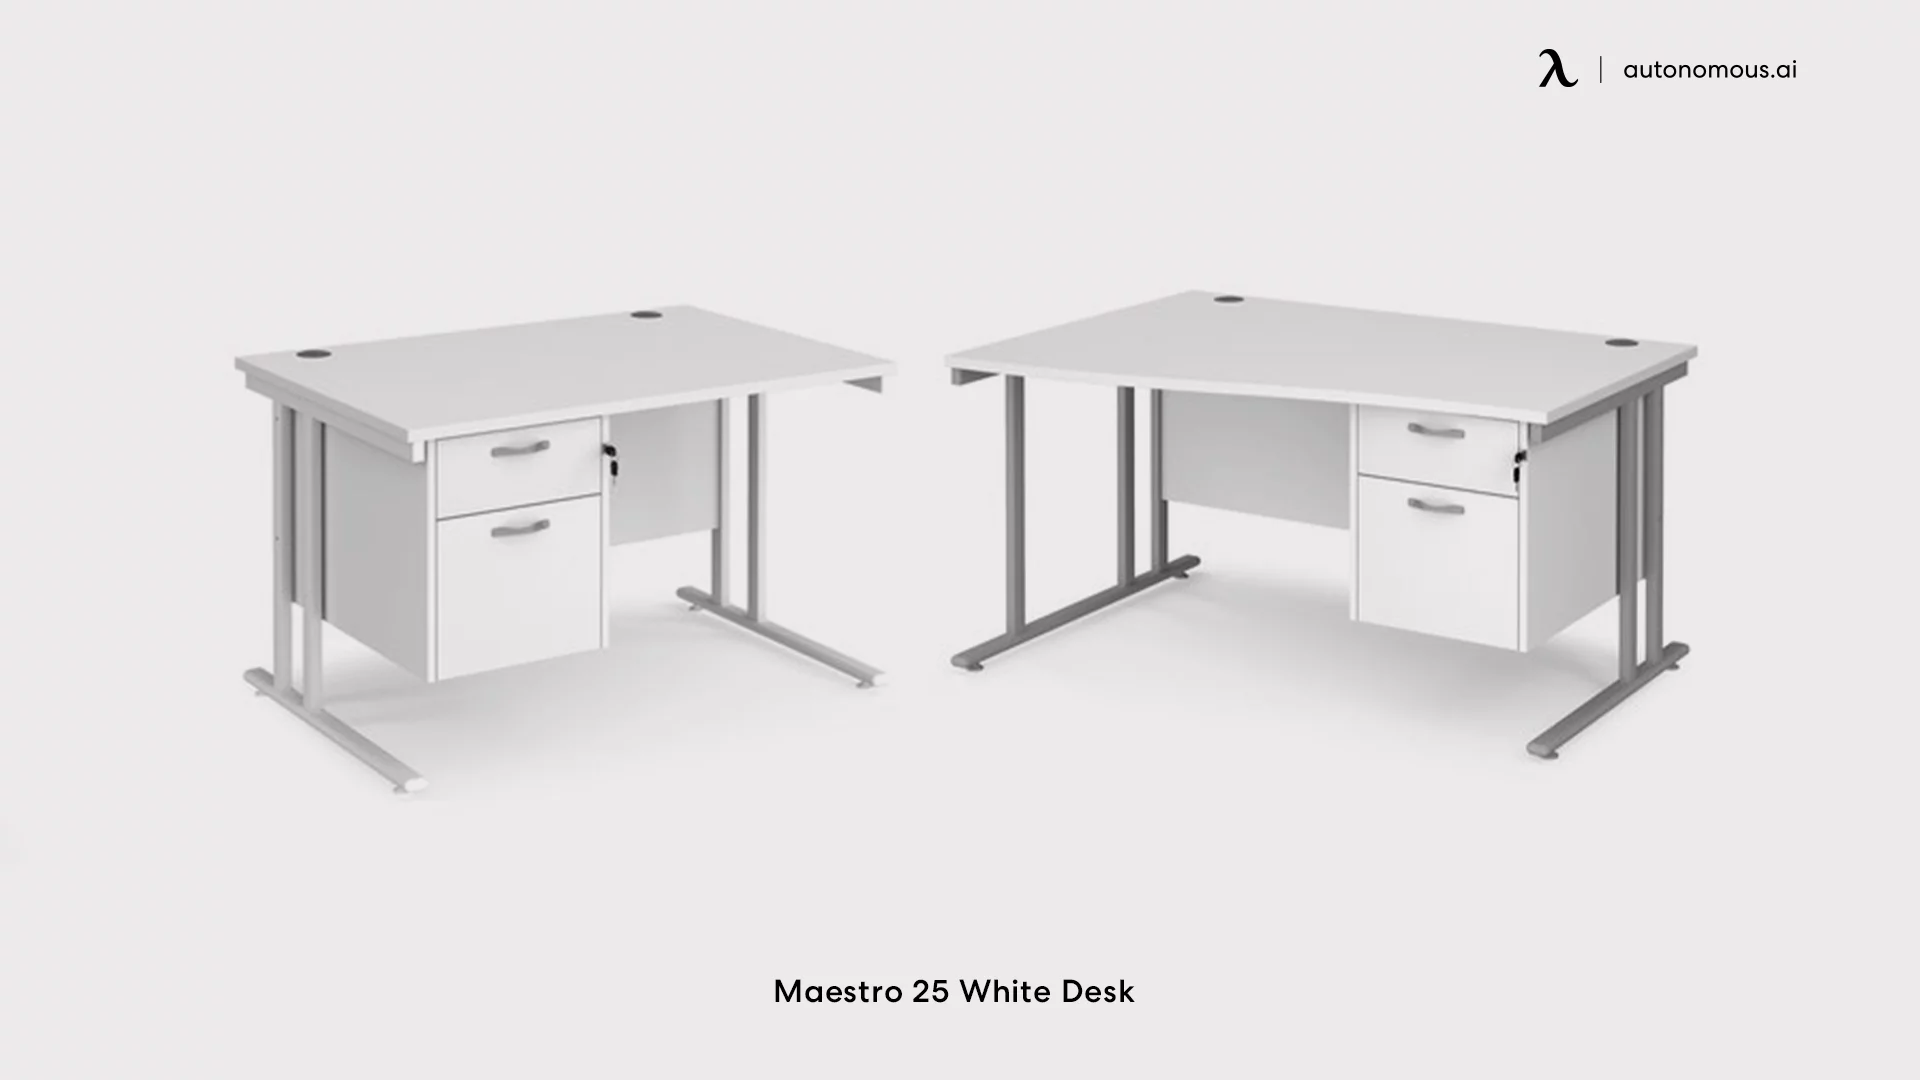 Maestro 25 white desk with drawers